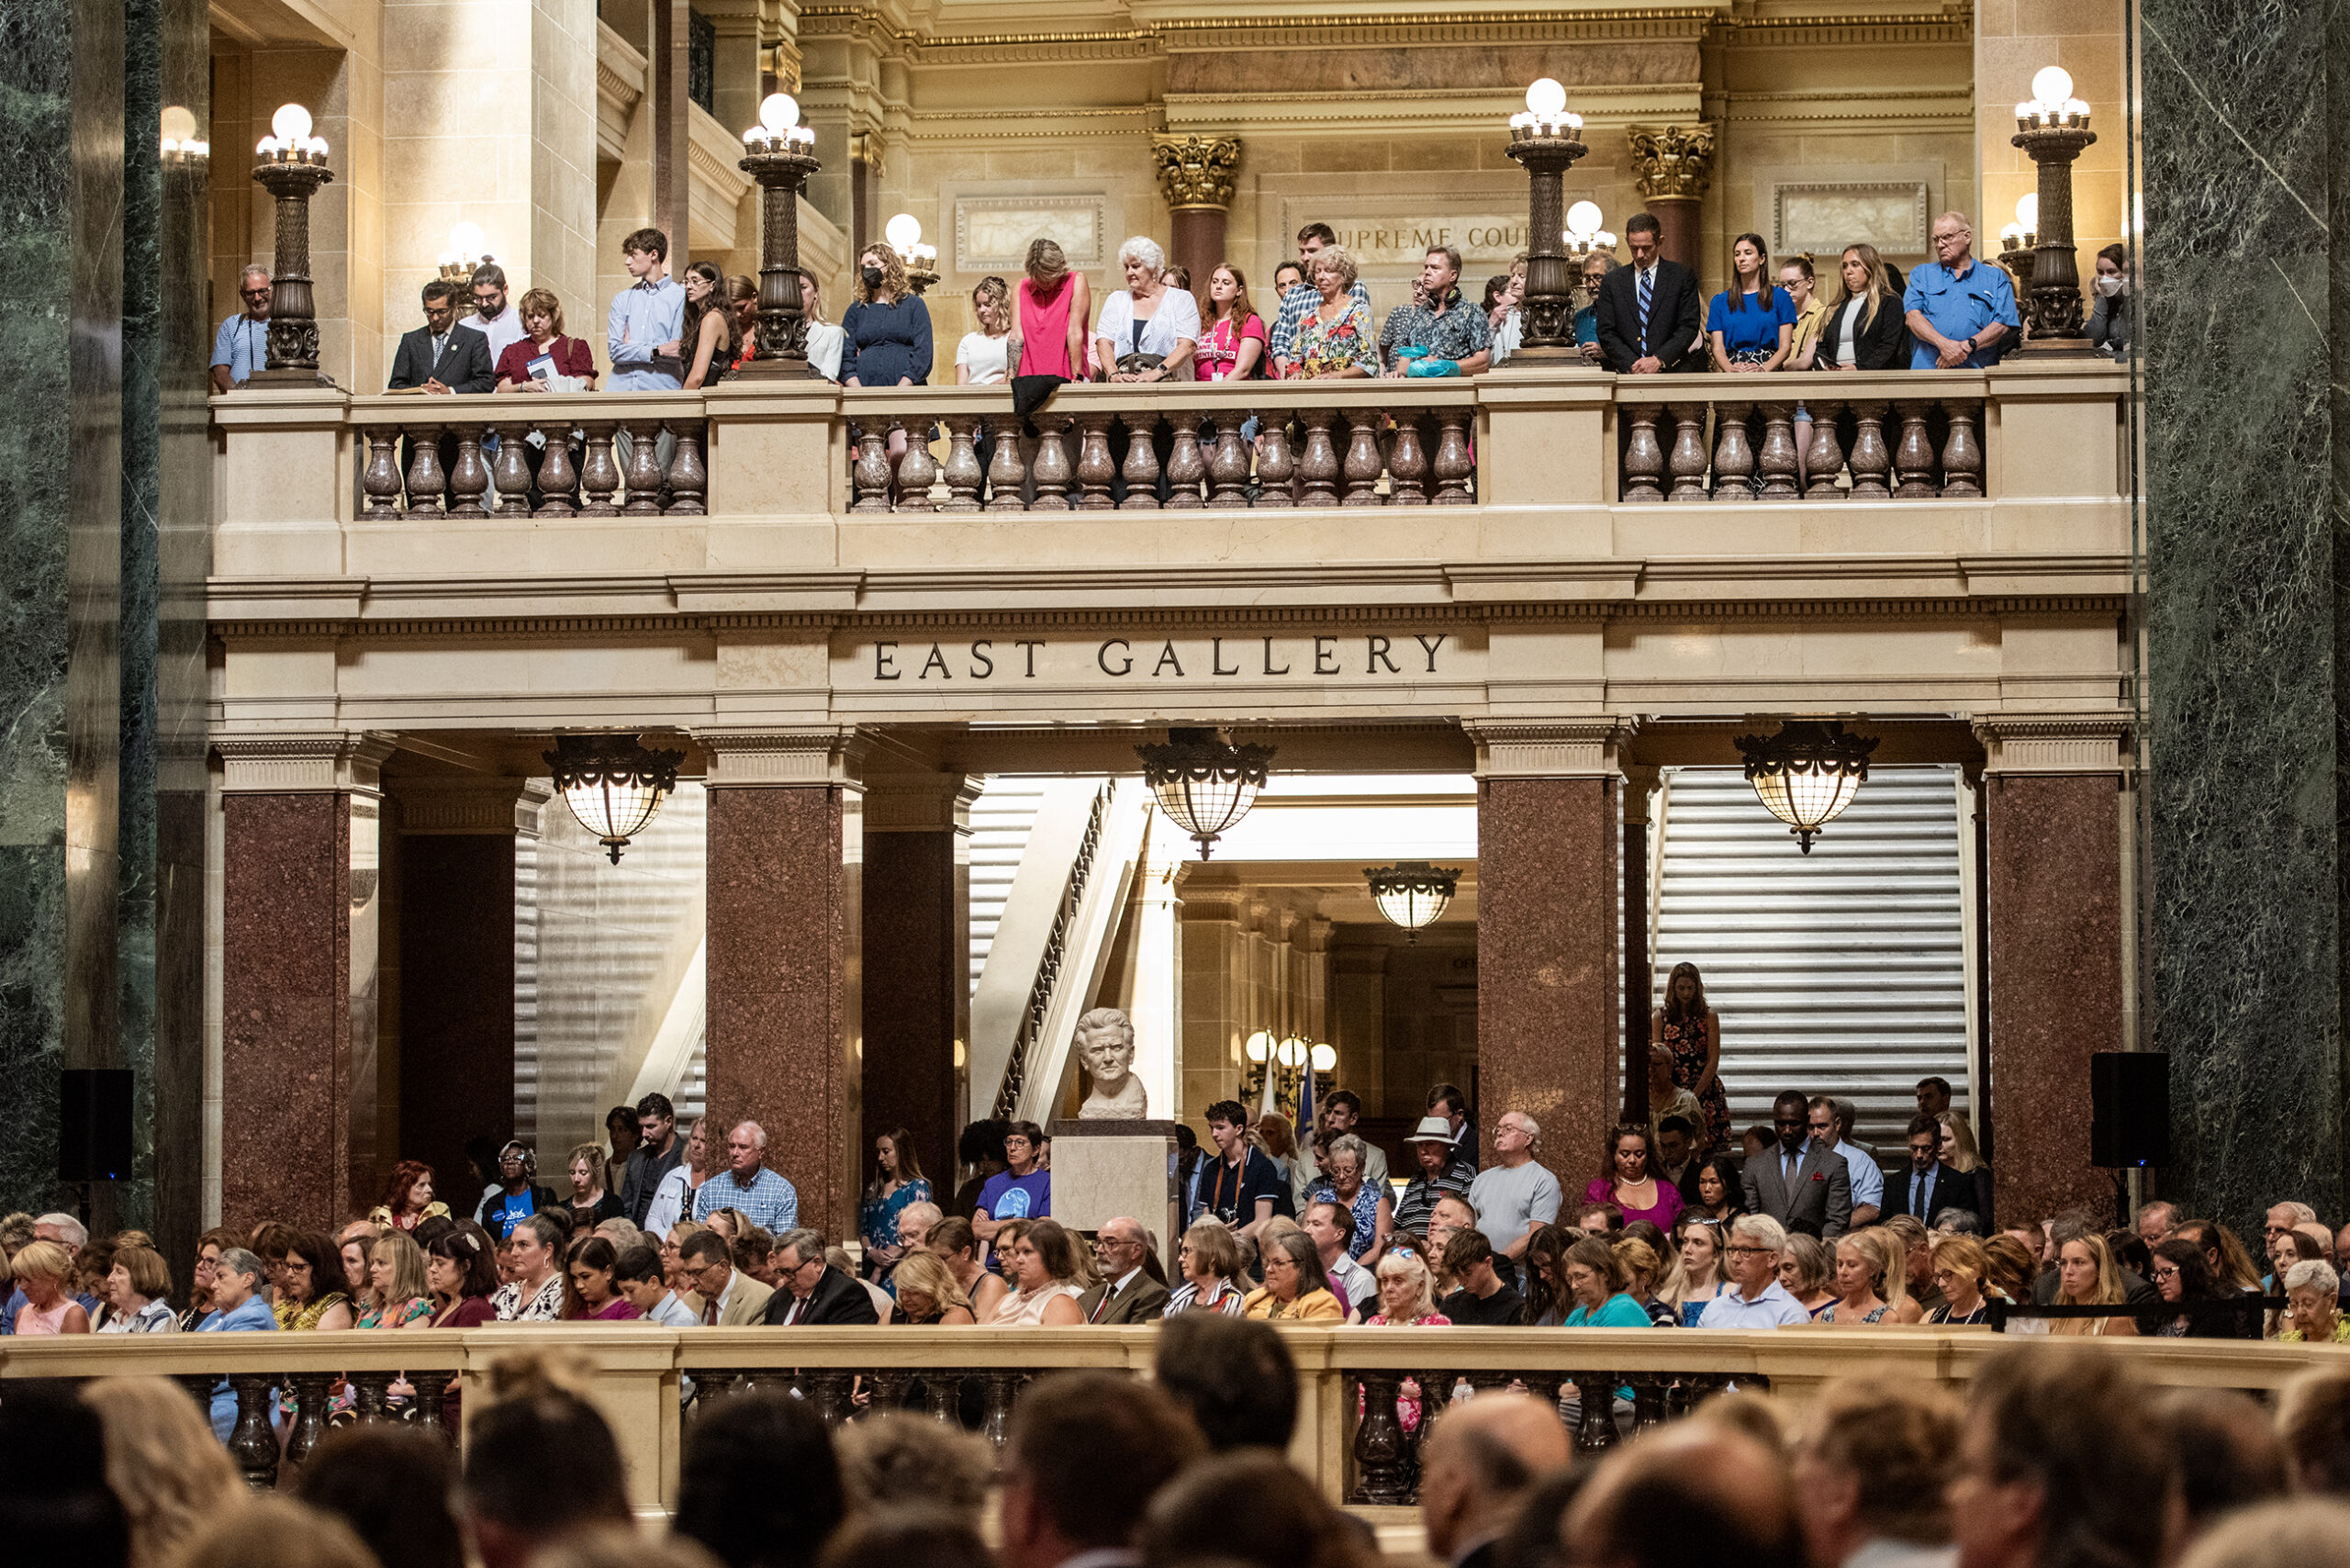 A crowd of people fill the East Gallery of the state capitol.